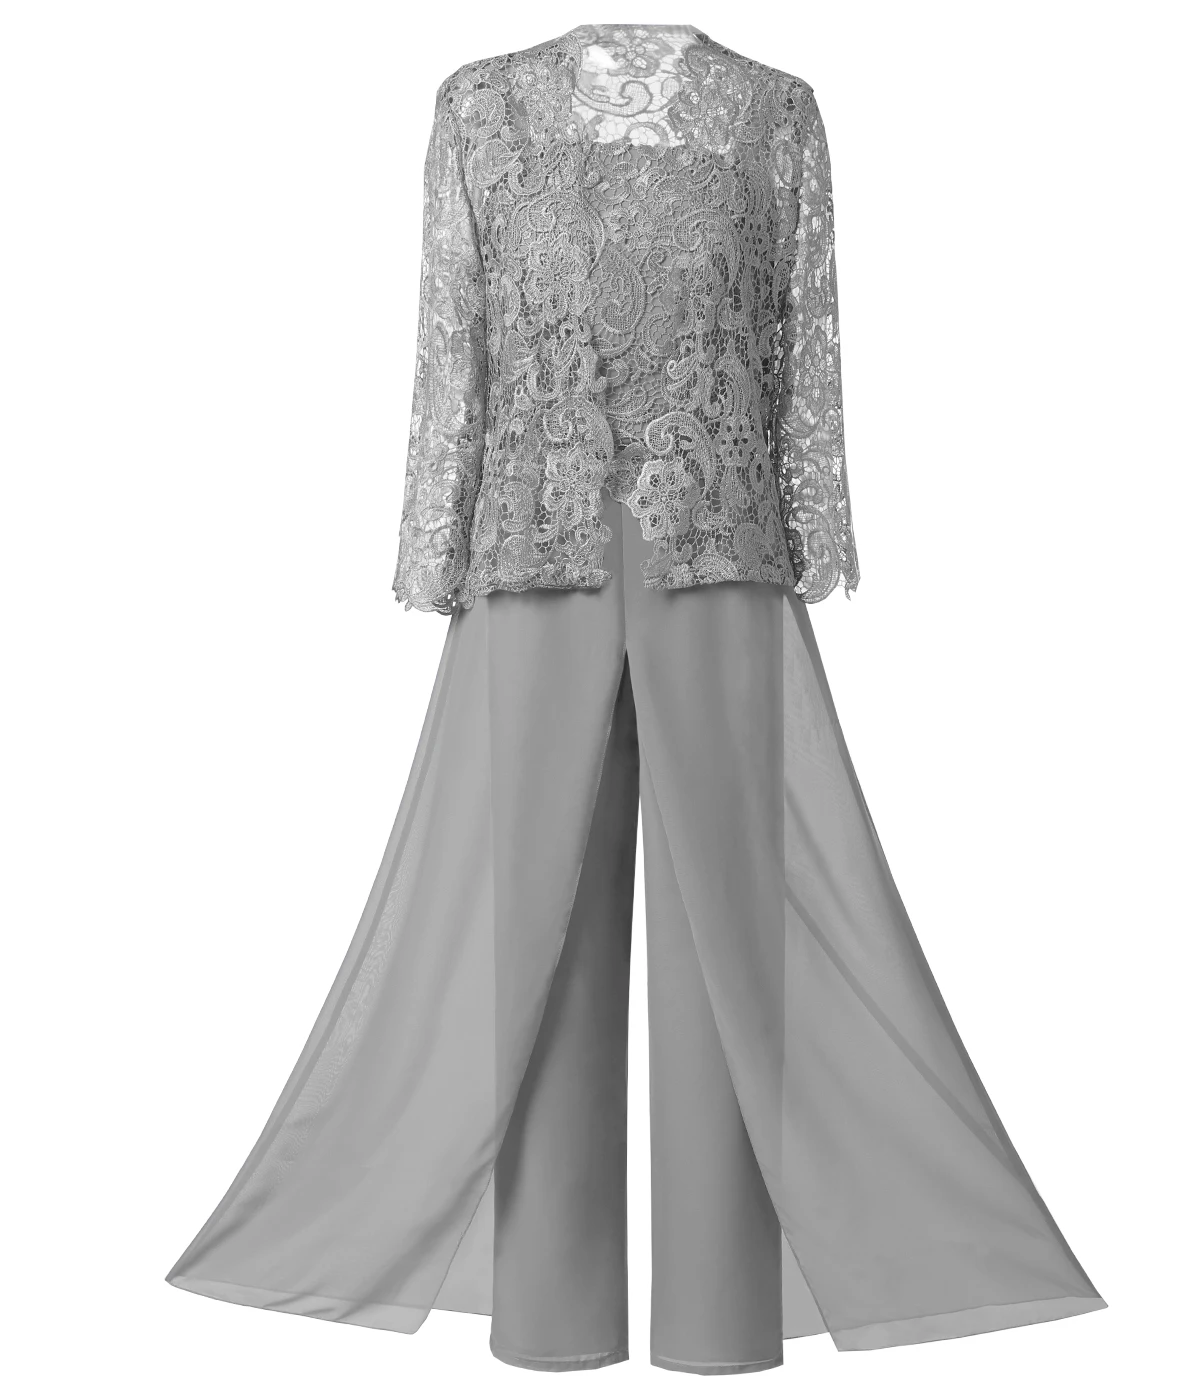 Solovedress-3-Three-Pieces-Mother-Of-the-Bride-Dress-Pants-Suit-With ...